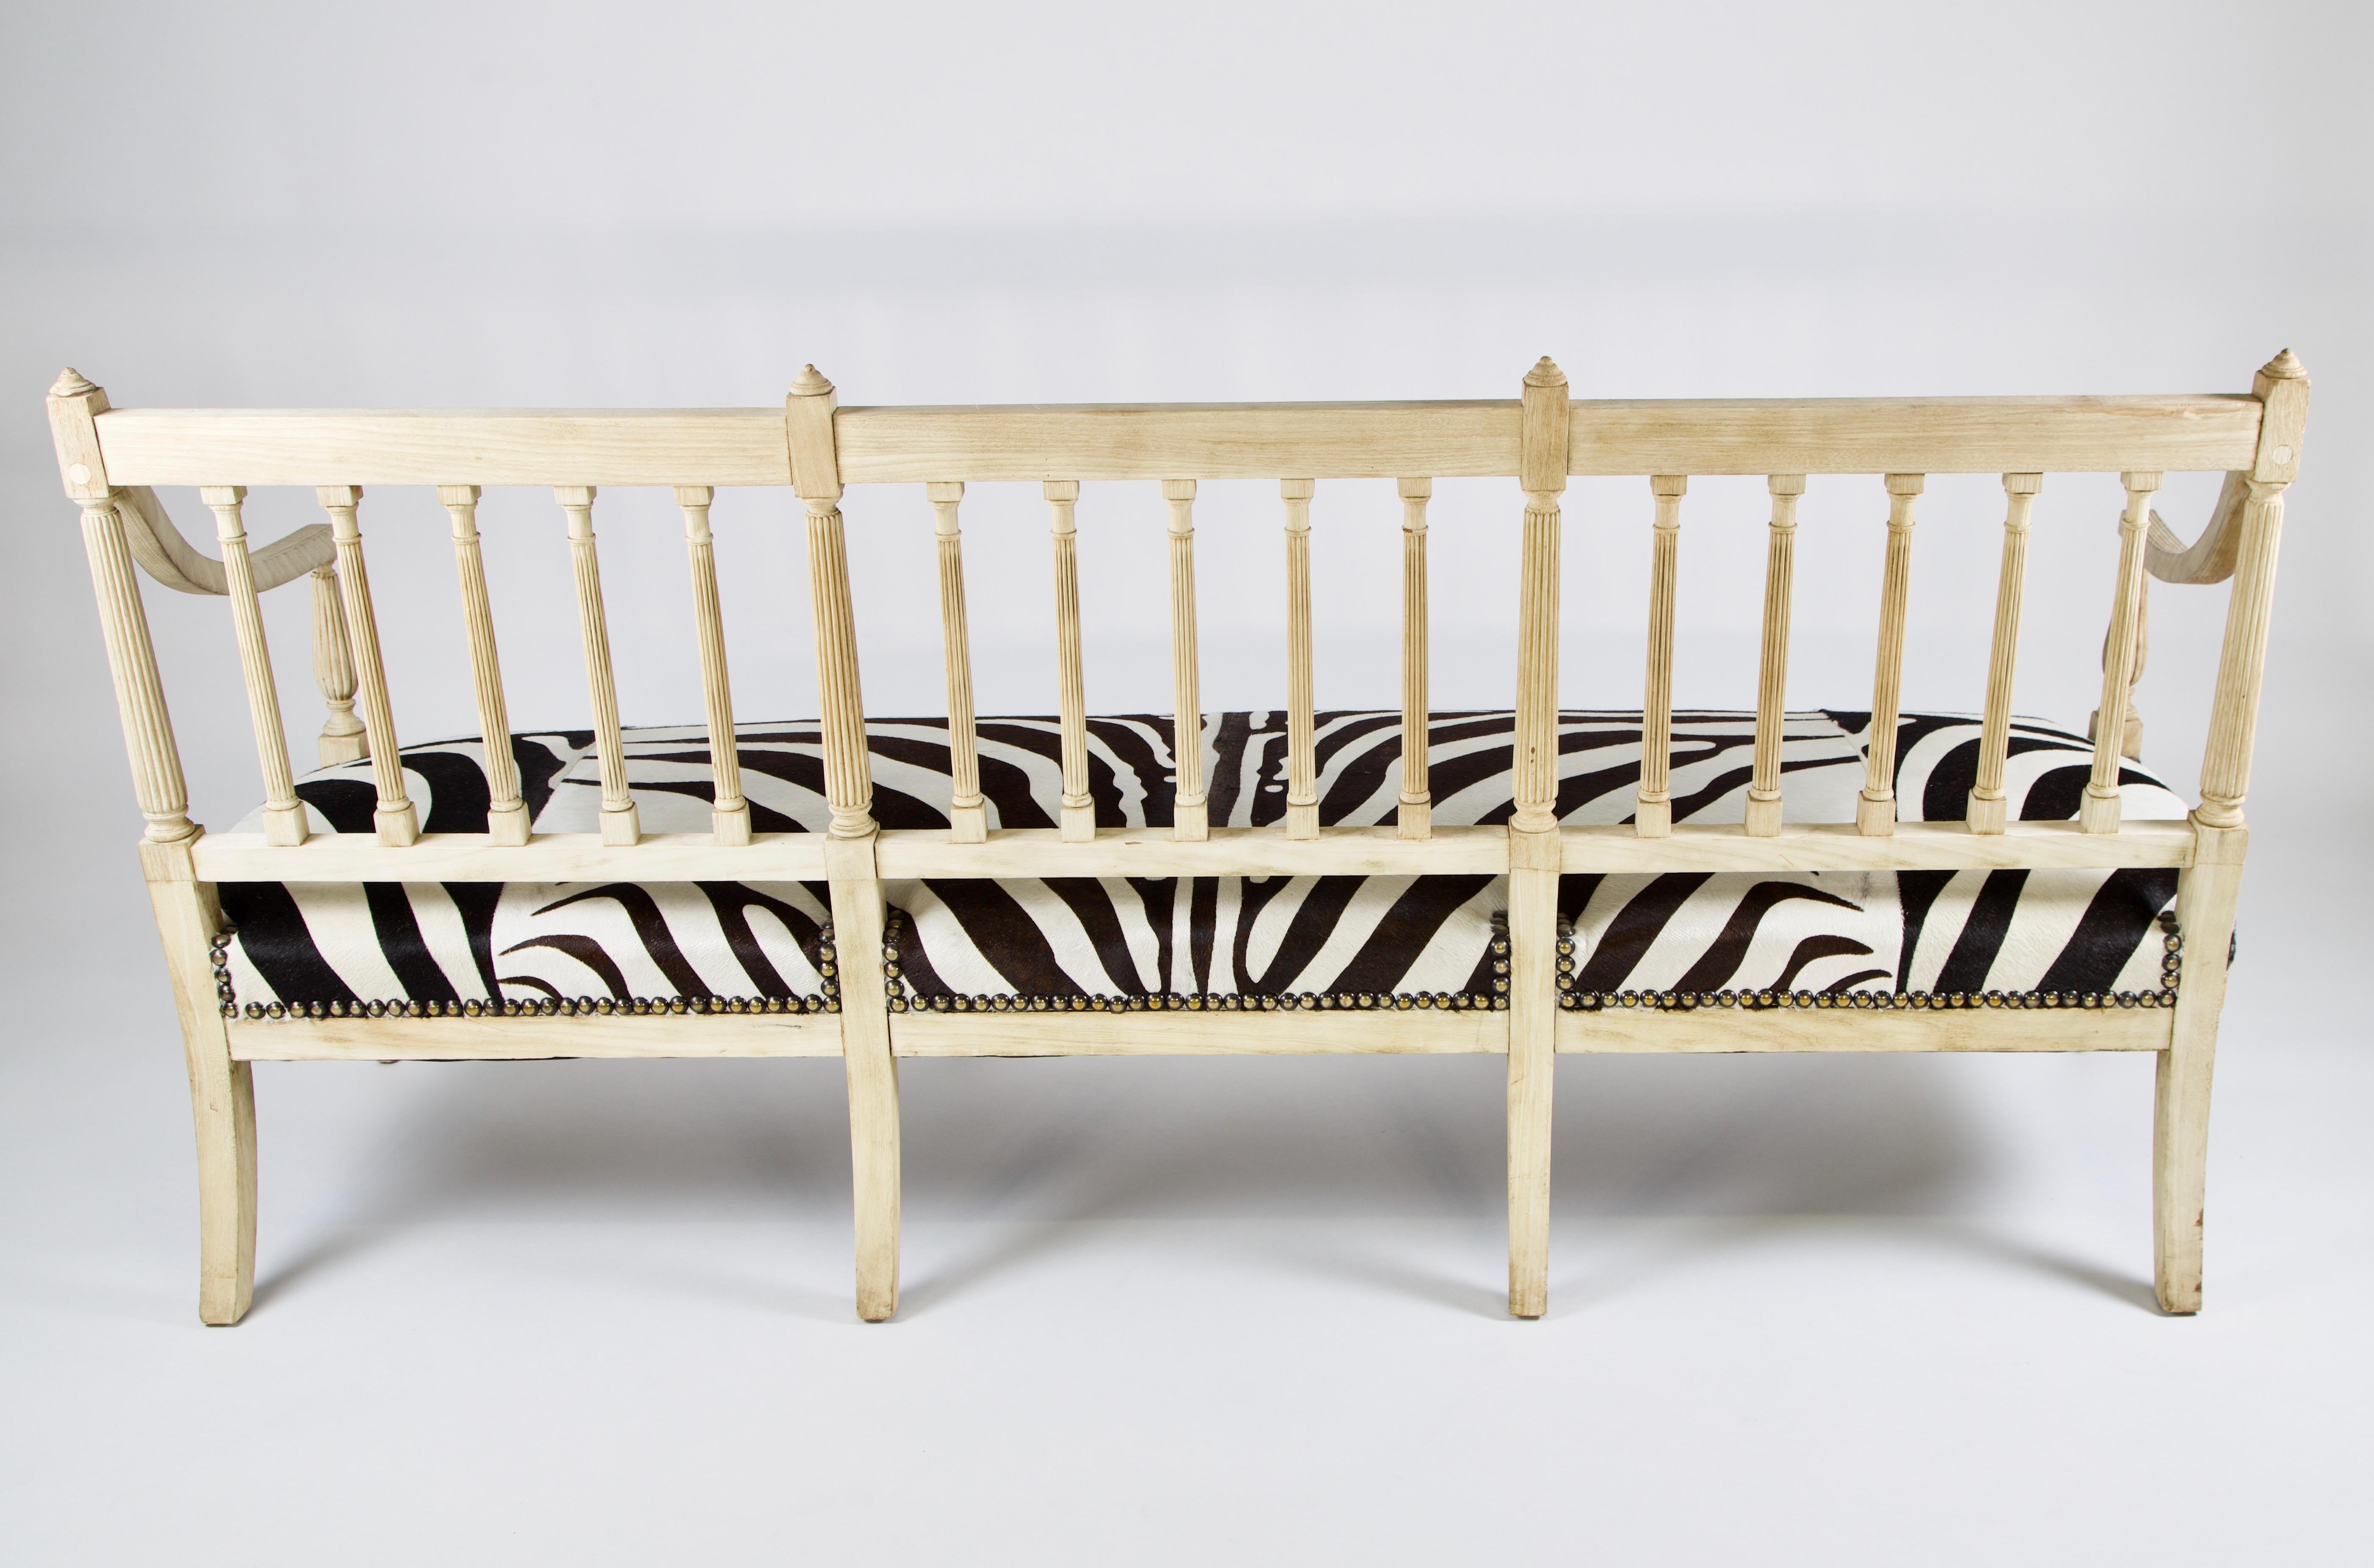 This is a 19th century neoclassic solid bleached  mahogany bench from the mid-1850s. It has spindle back with reeding on the legs with a gentle curve to the arms. It has a 8 way hand tied seat which has been reupholstered with a zebra cow hide and